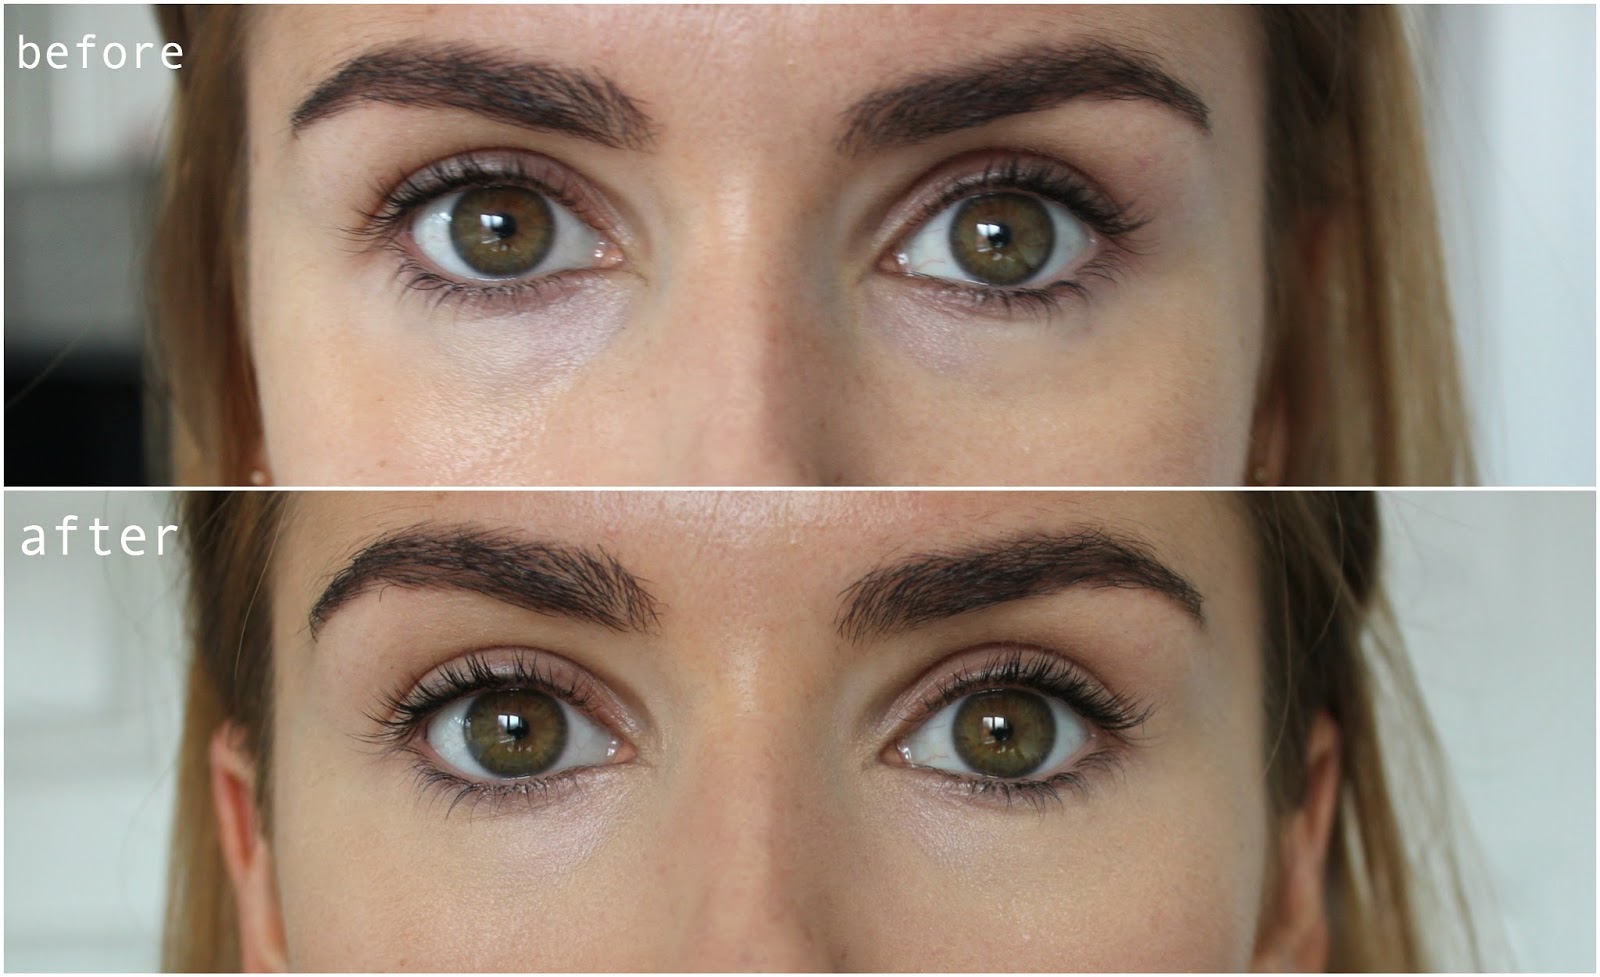 charlotte-tilbury-mini-miracle-eye-wand-before-after-review